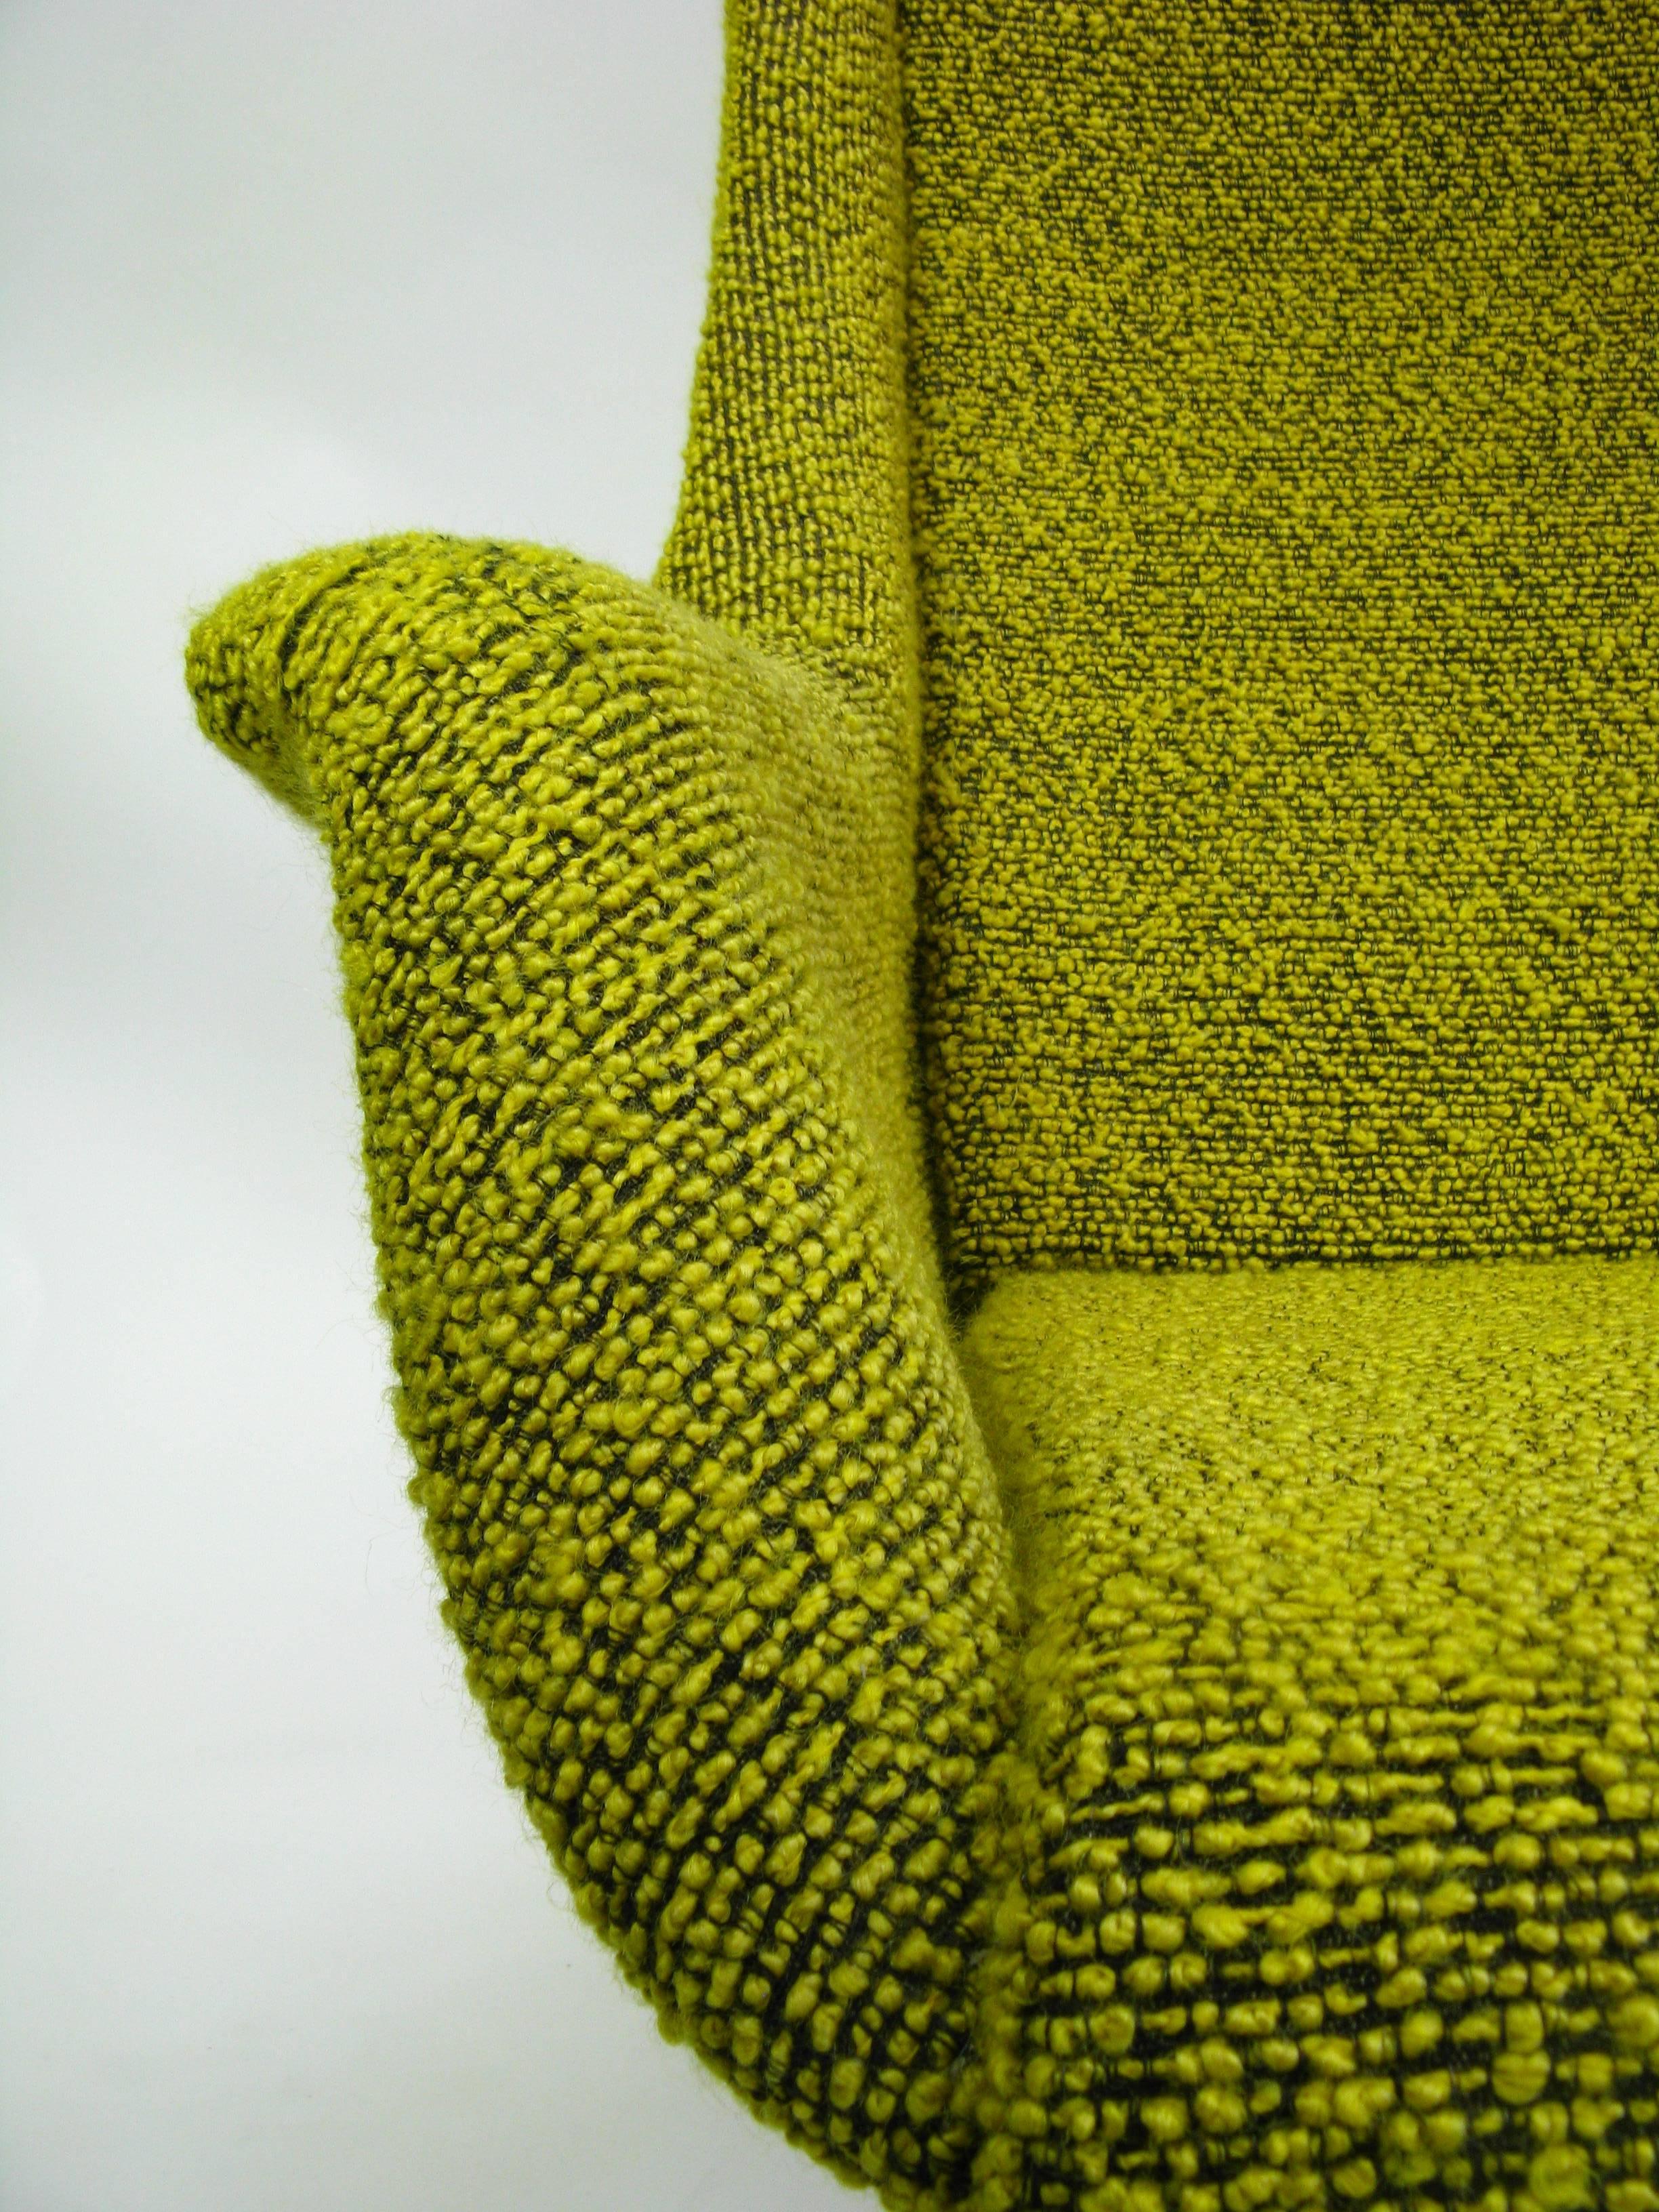 Mid-Century Modern Yellow and Green Wingback Armchair by Miroslav Navratil for Ton, 1960s